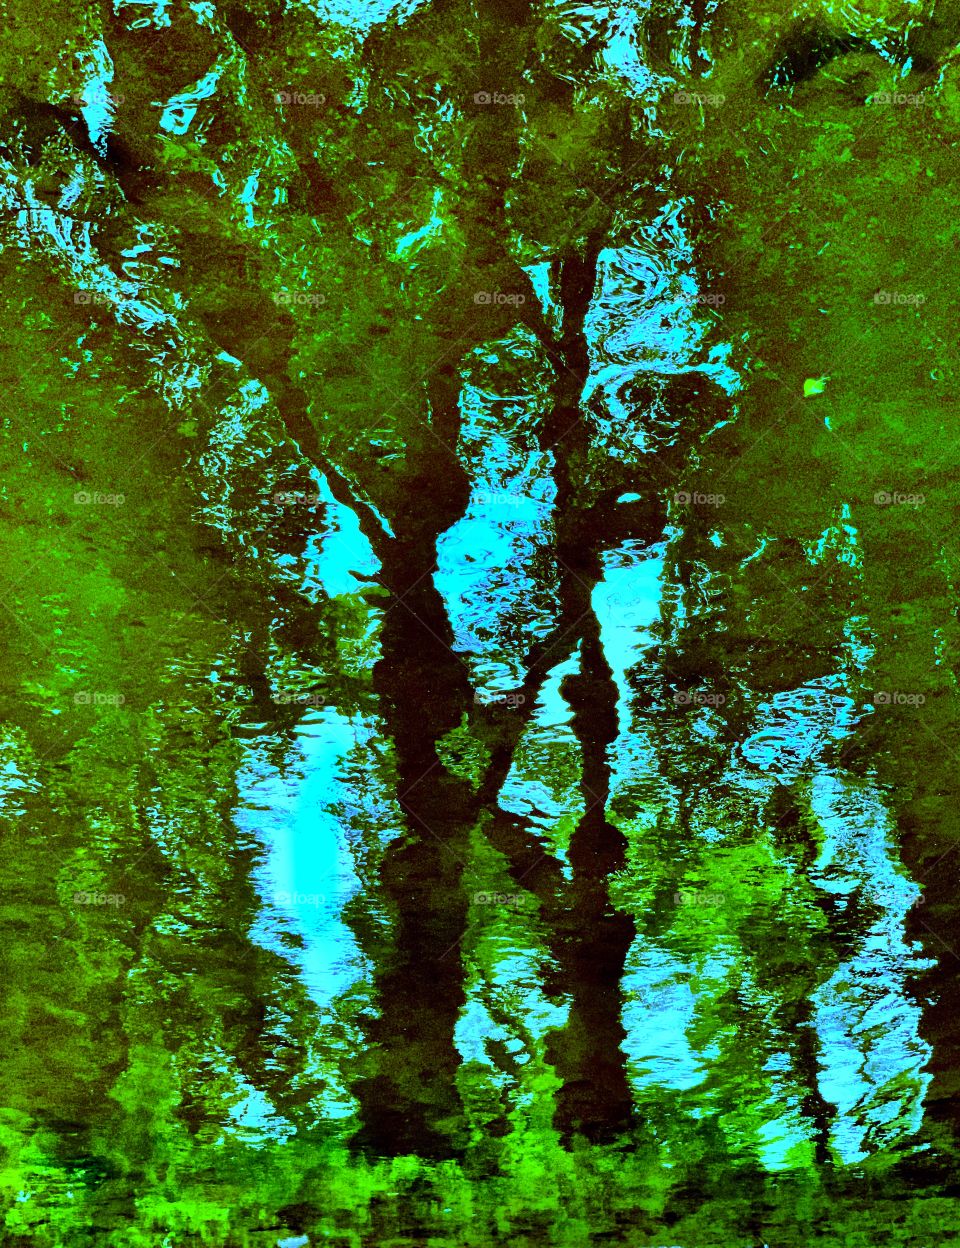 abstract reflection of green leafed trees against blue sky in a rippling pond on a sunny summer’s day